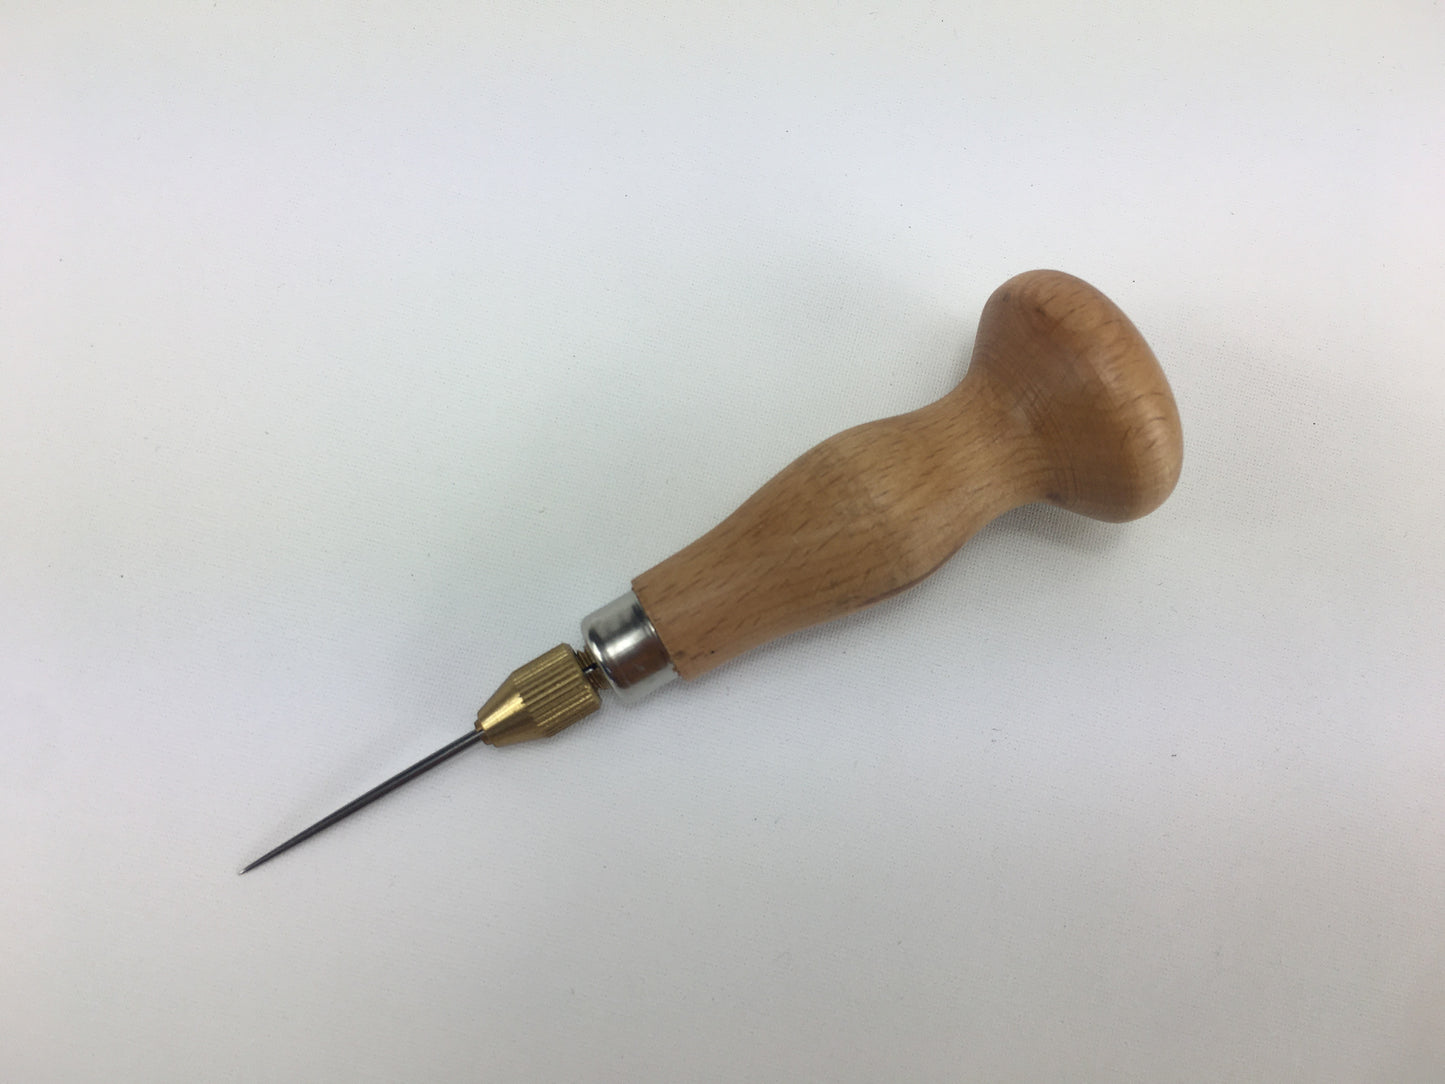 Replaceable awl